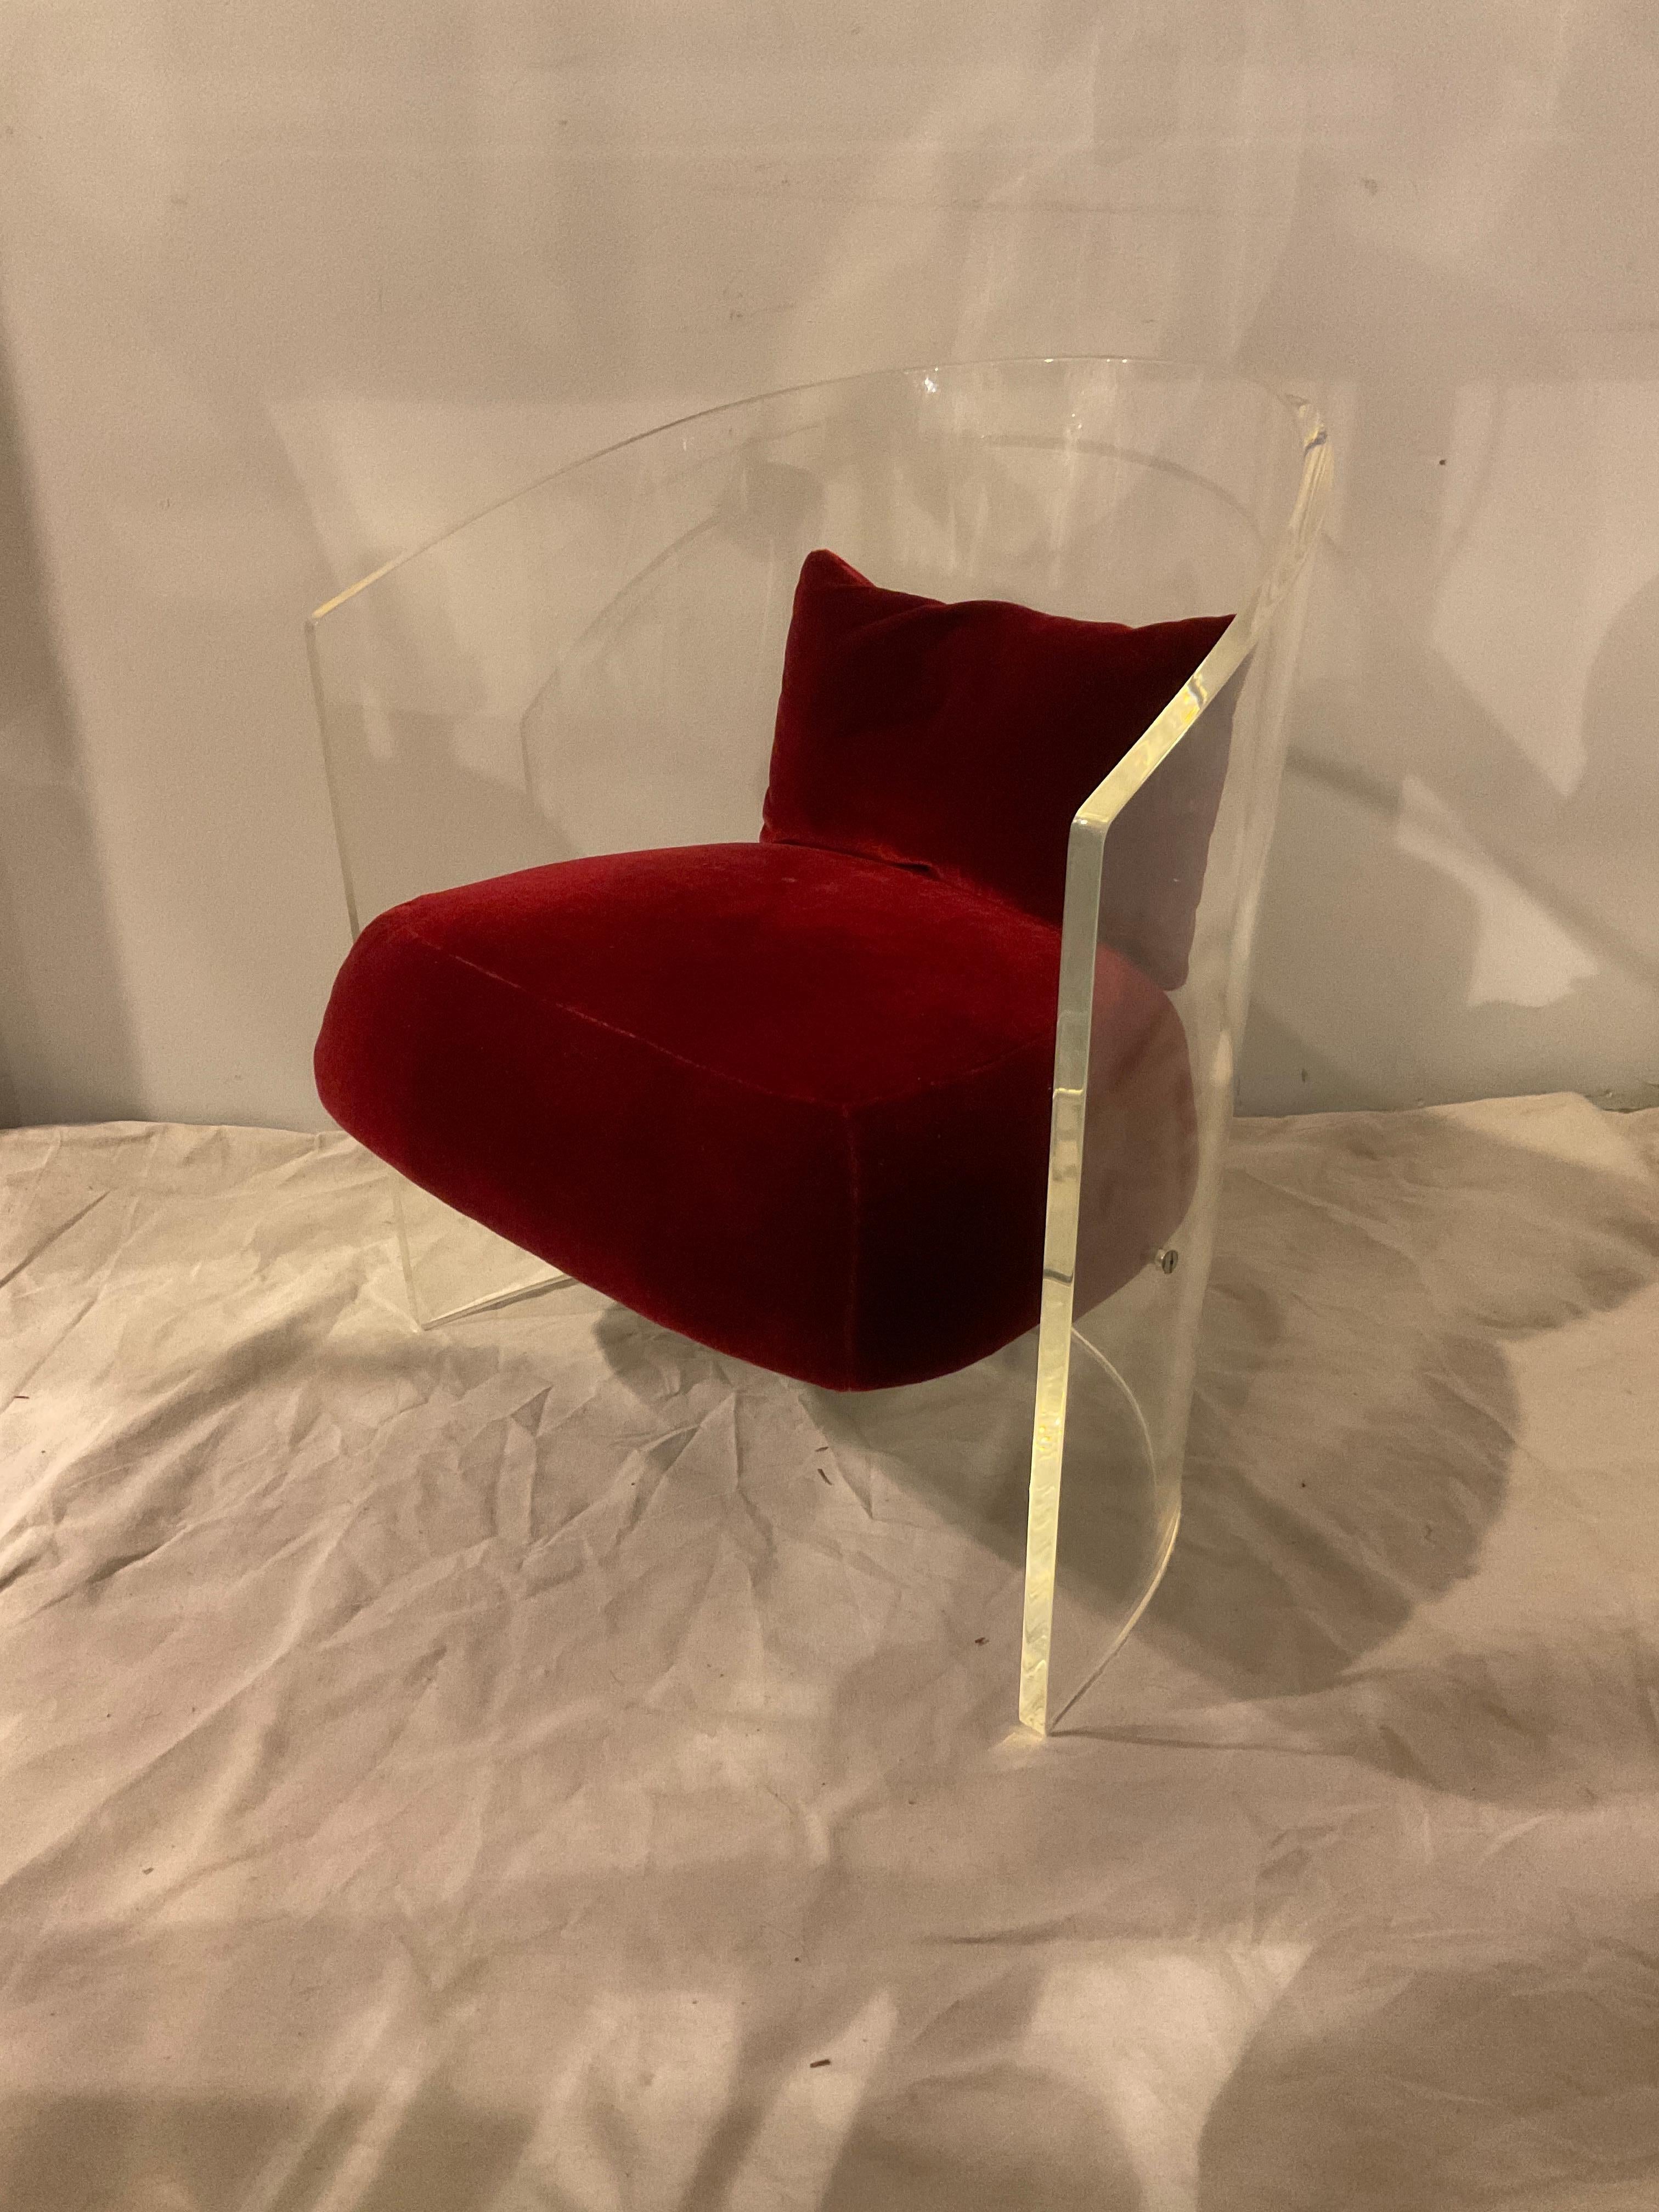  Lucite Barrel Chair By Pace In Good Condition For Sale In Tarrytown, NY